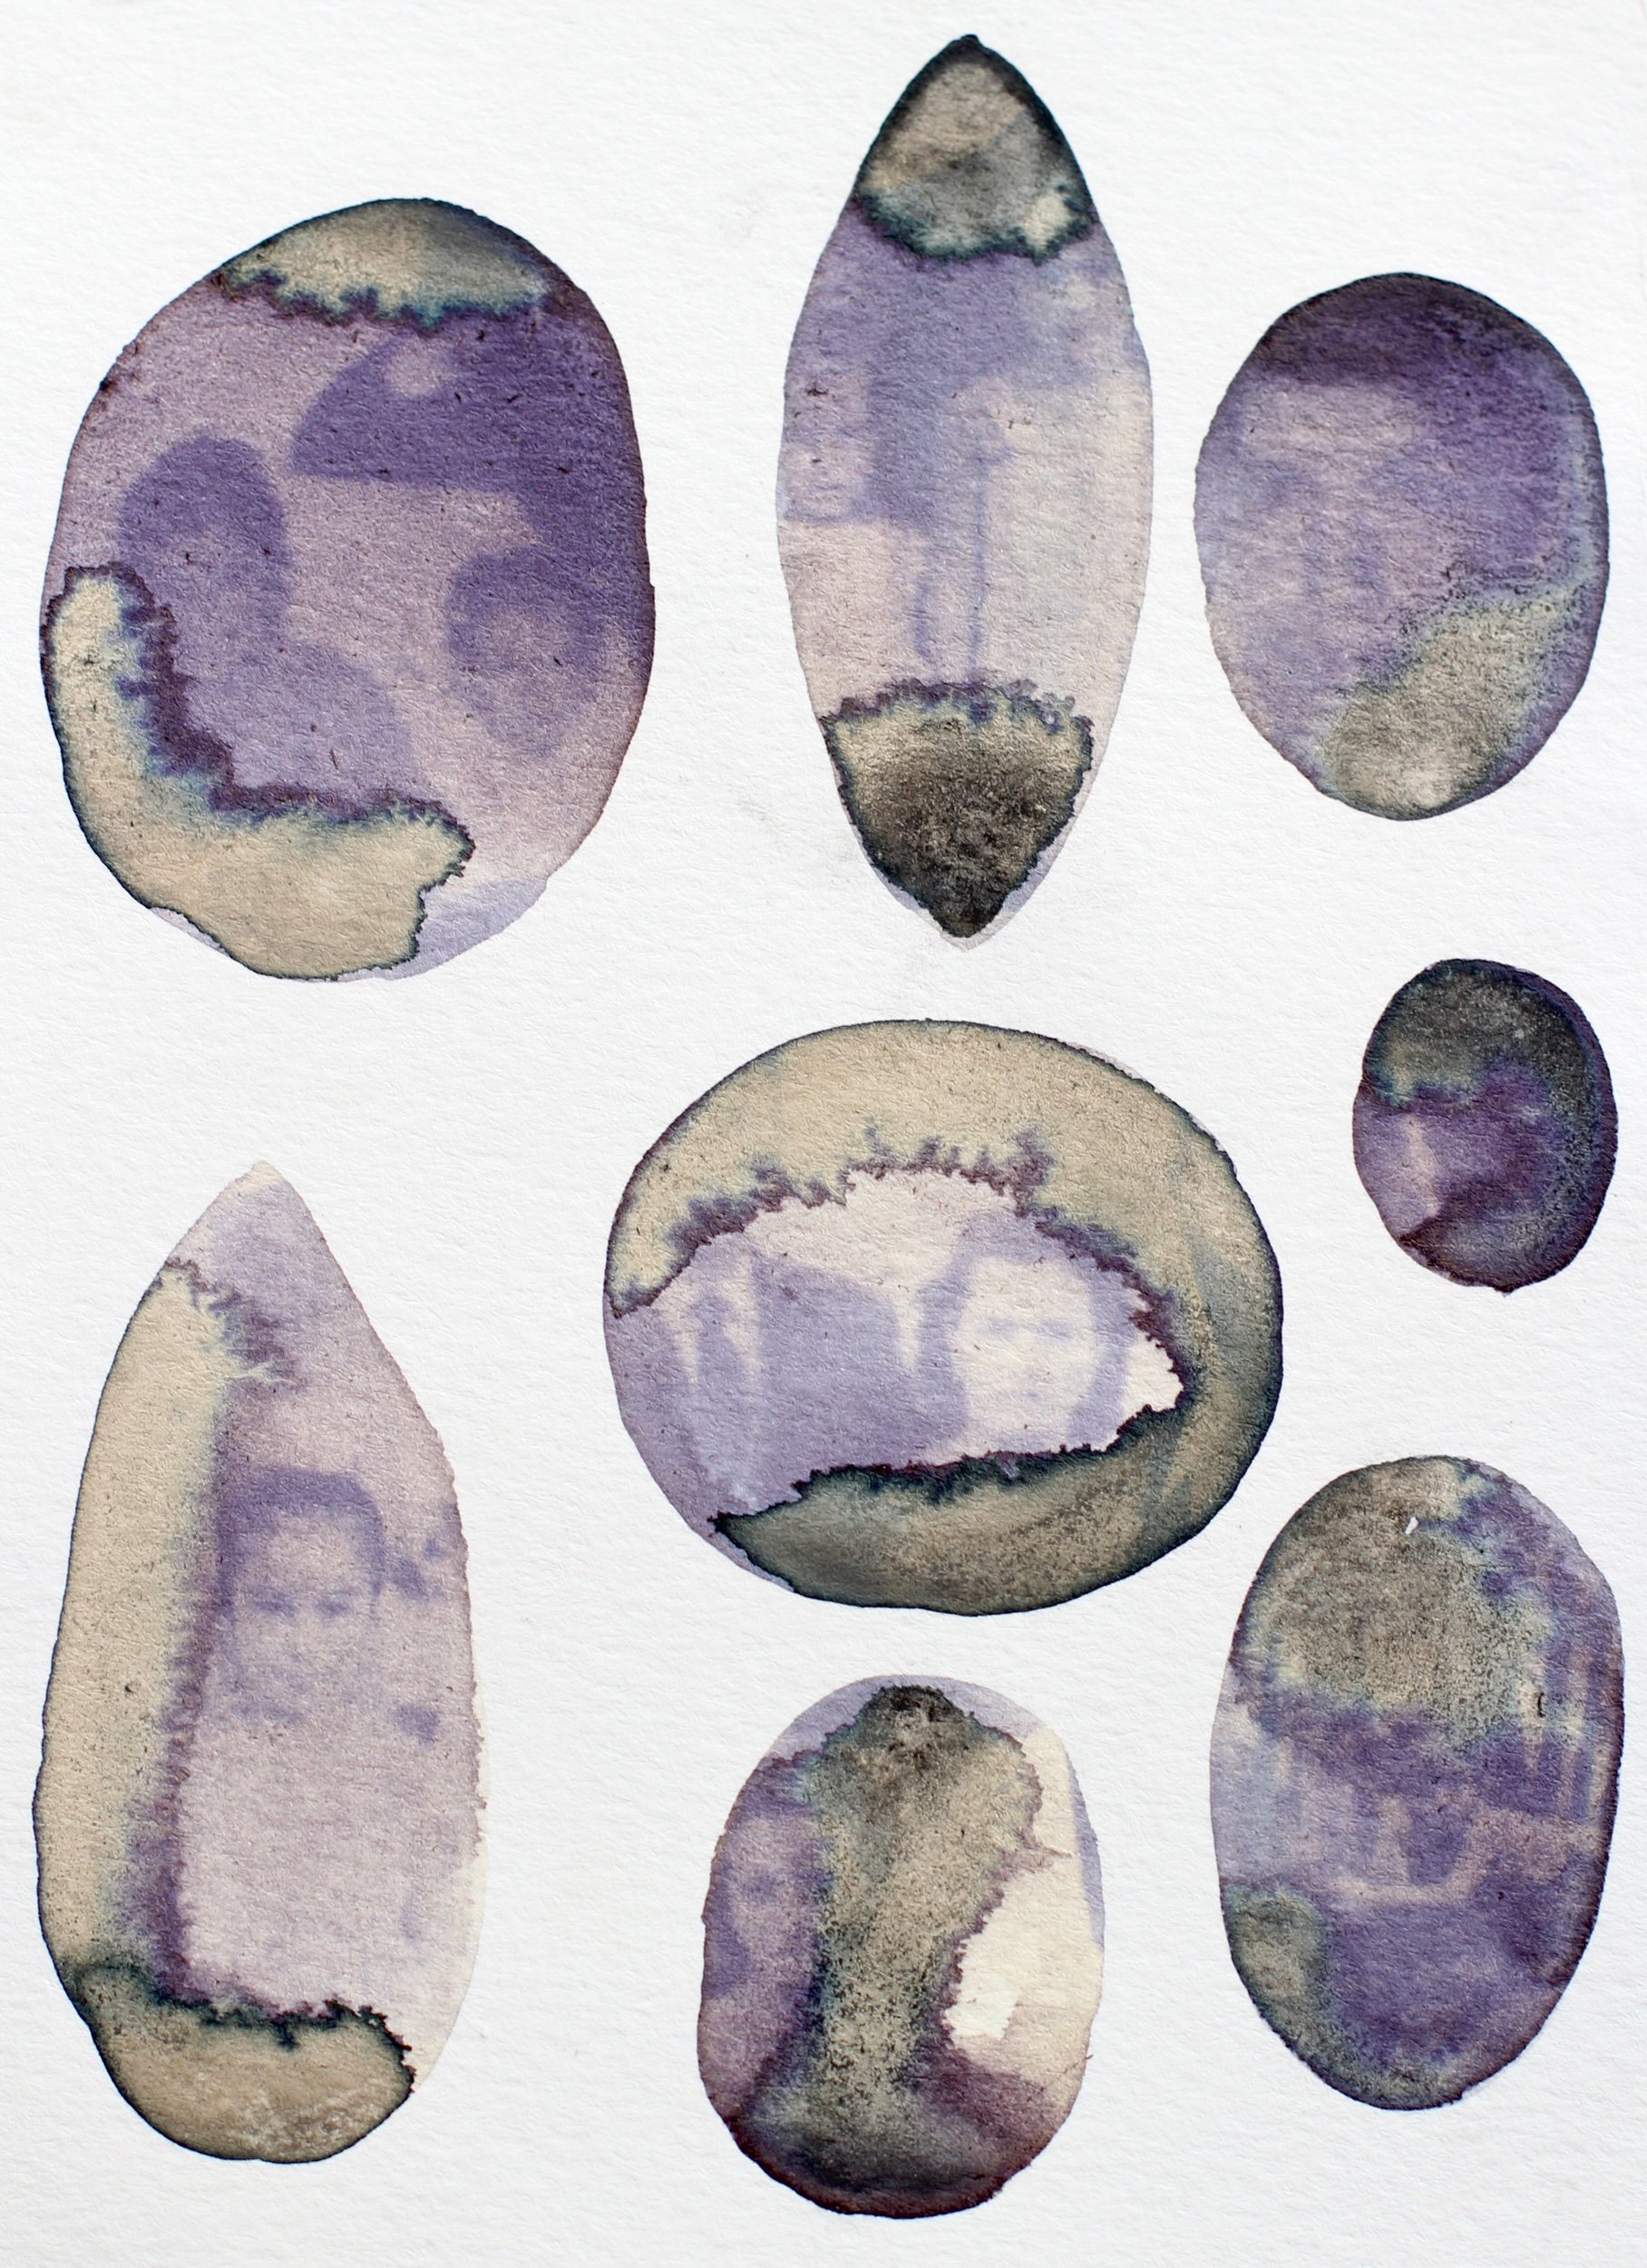    Faint Faces,    2023   Butterfly pea flower anthotype, rust, water, alcohol, vinegar and oak galls 